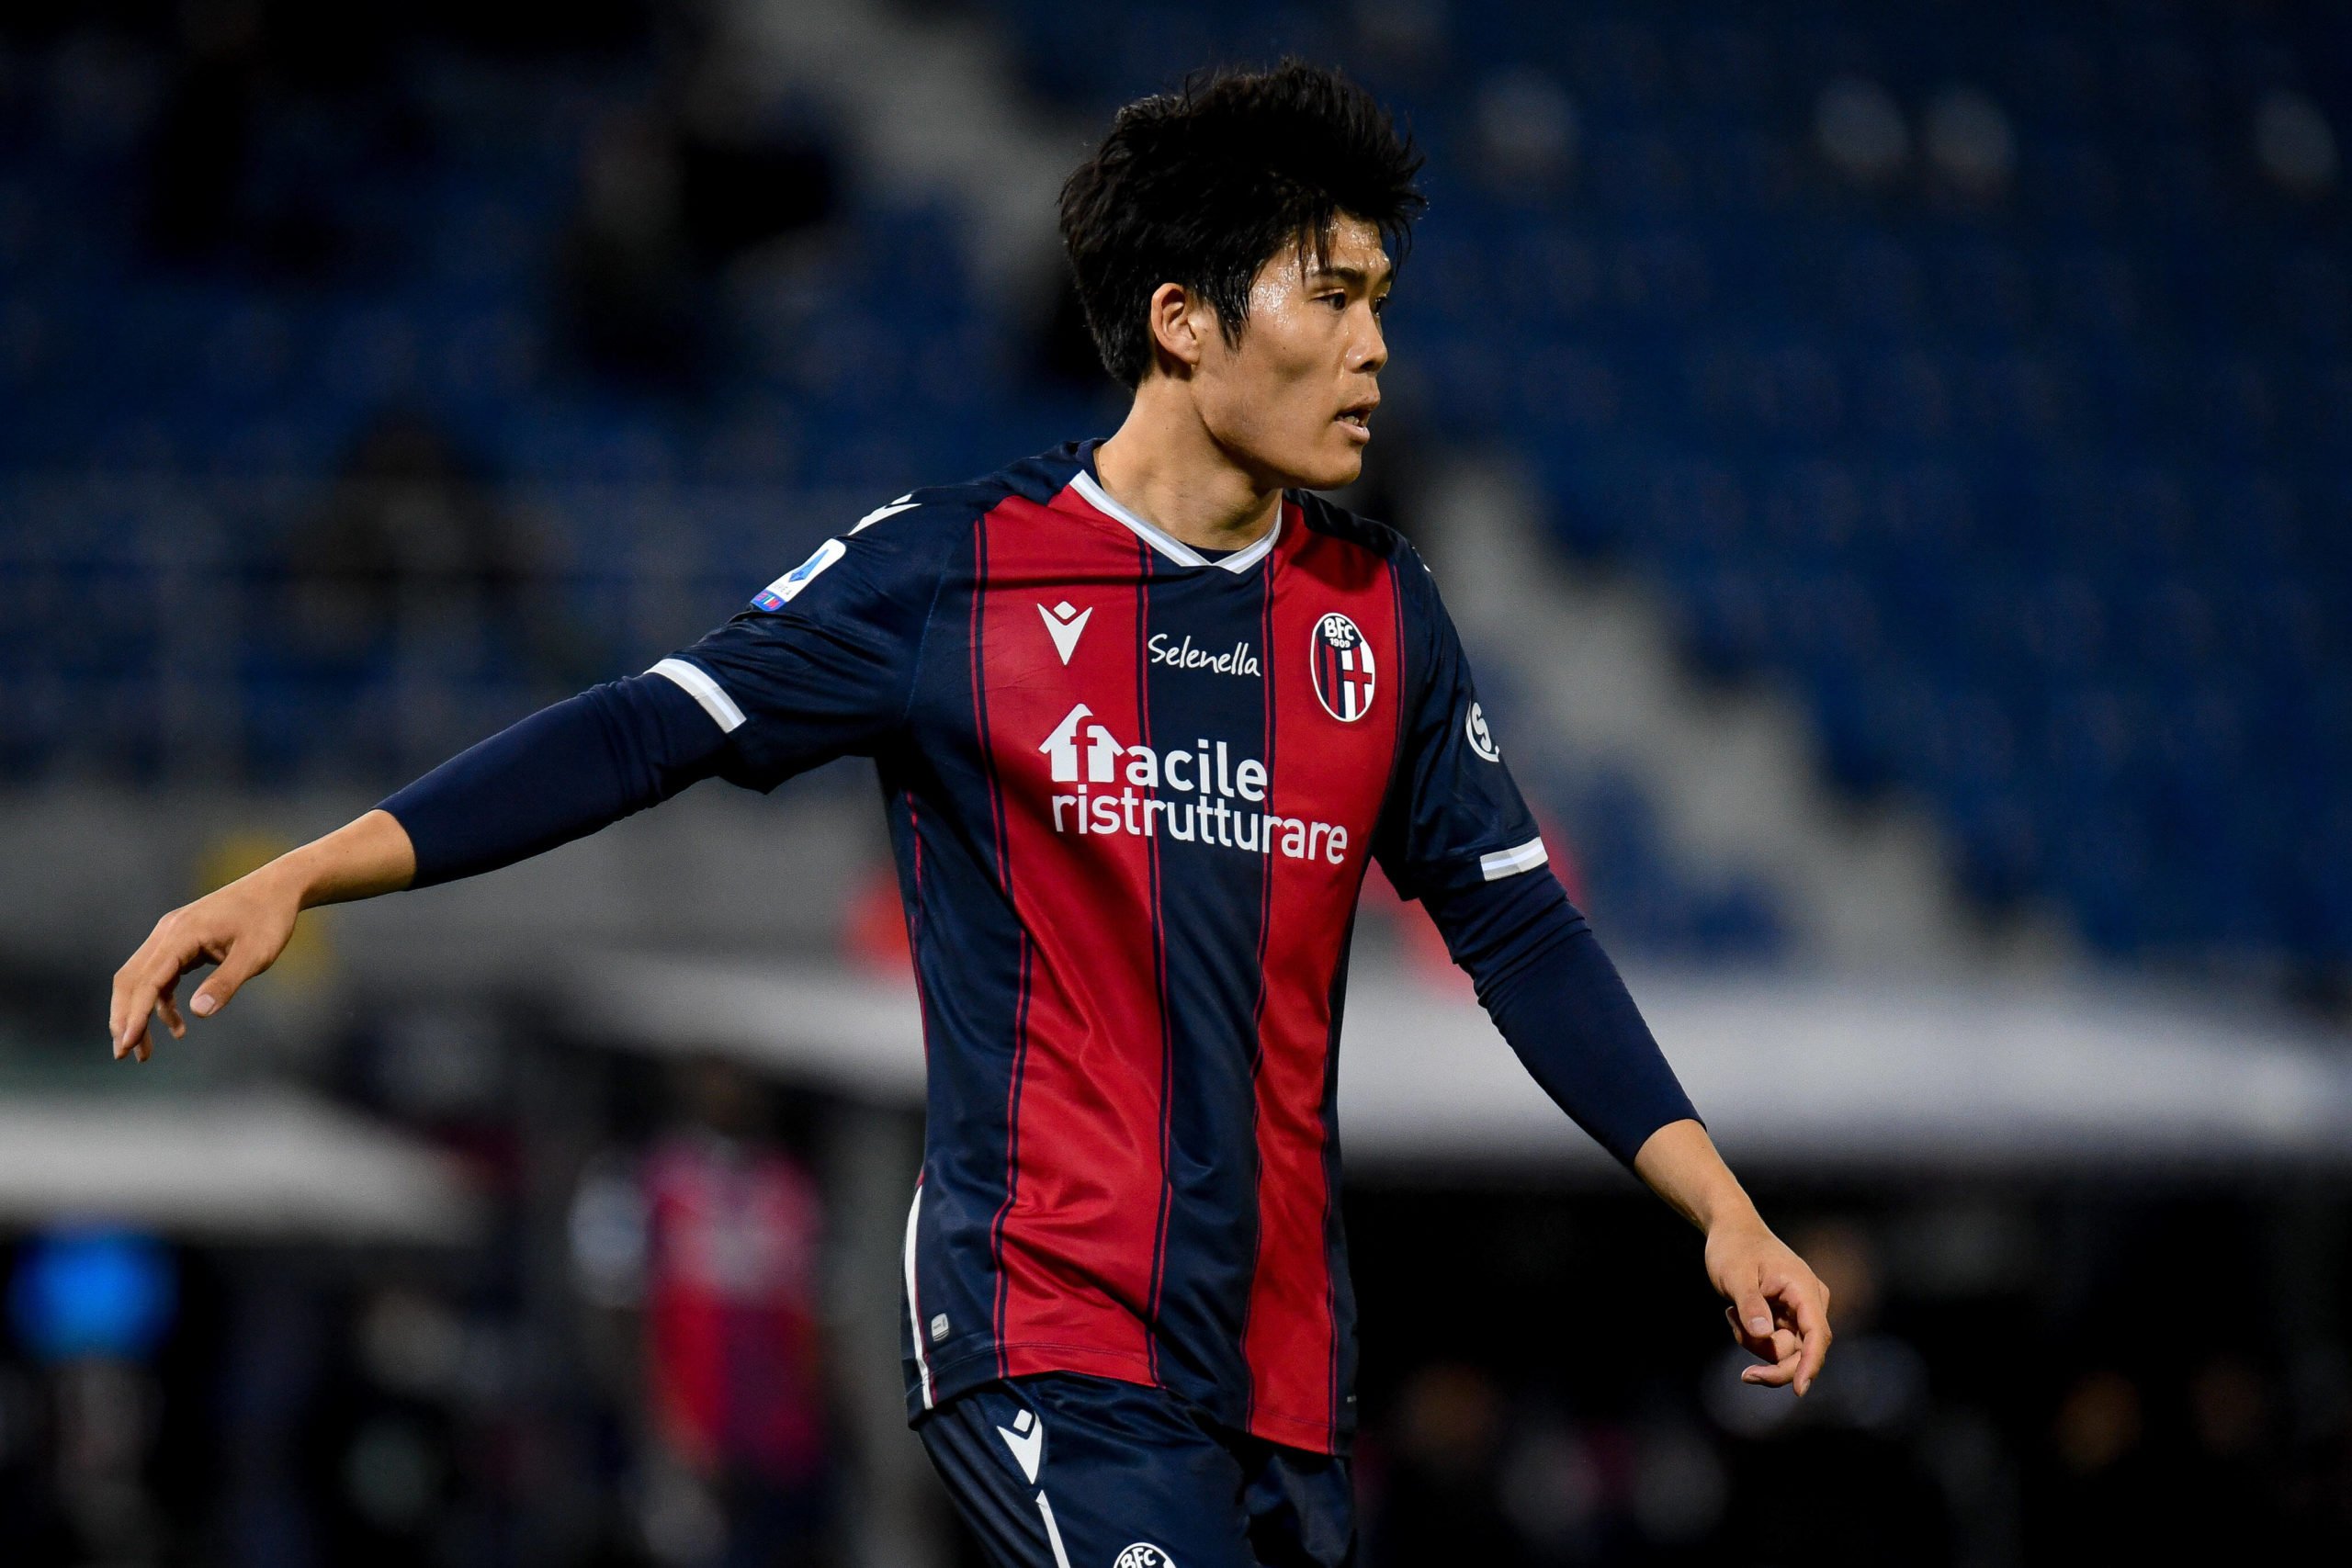 West Ham United to rival Arsenal for Tomiyasu who is seen in the picture